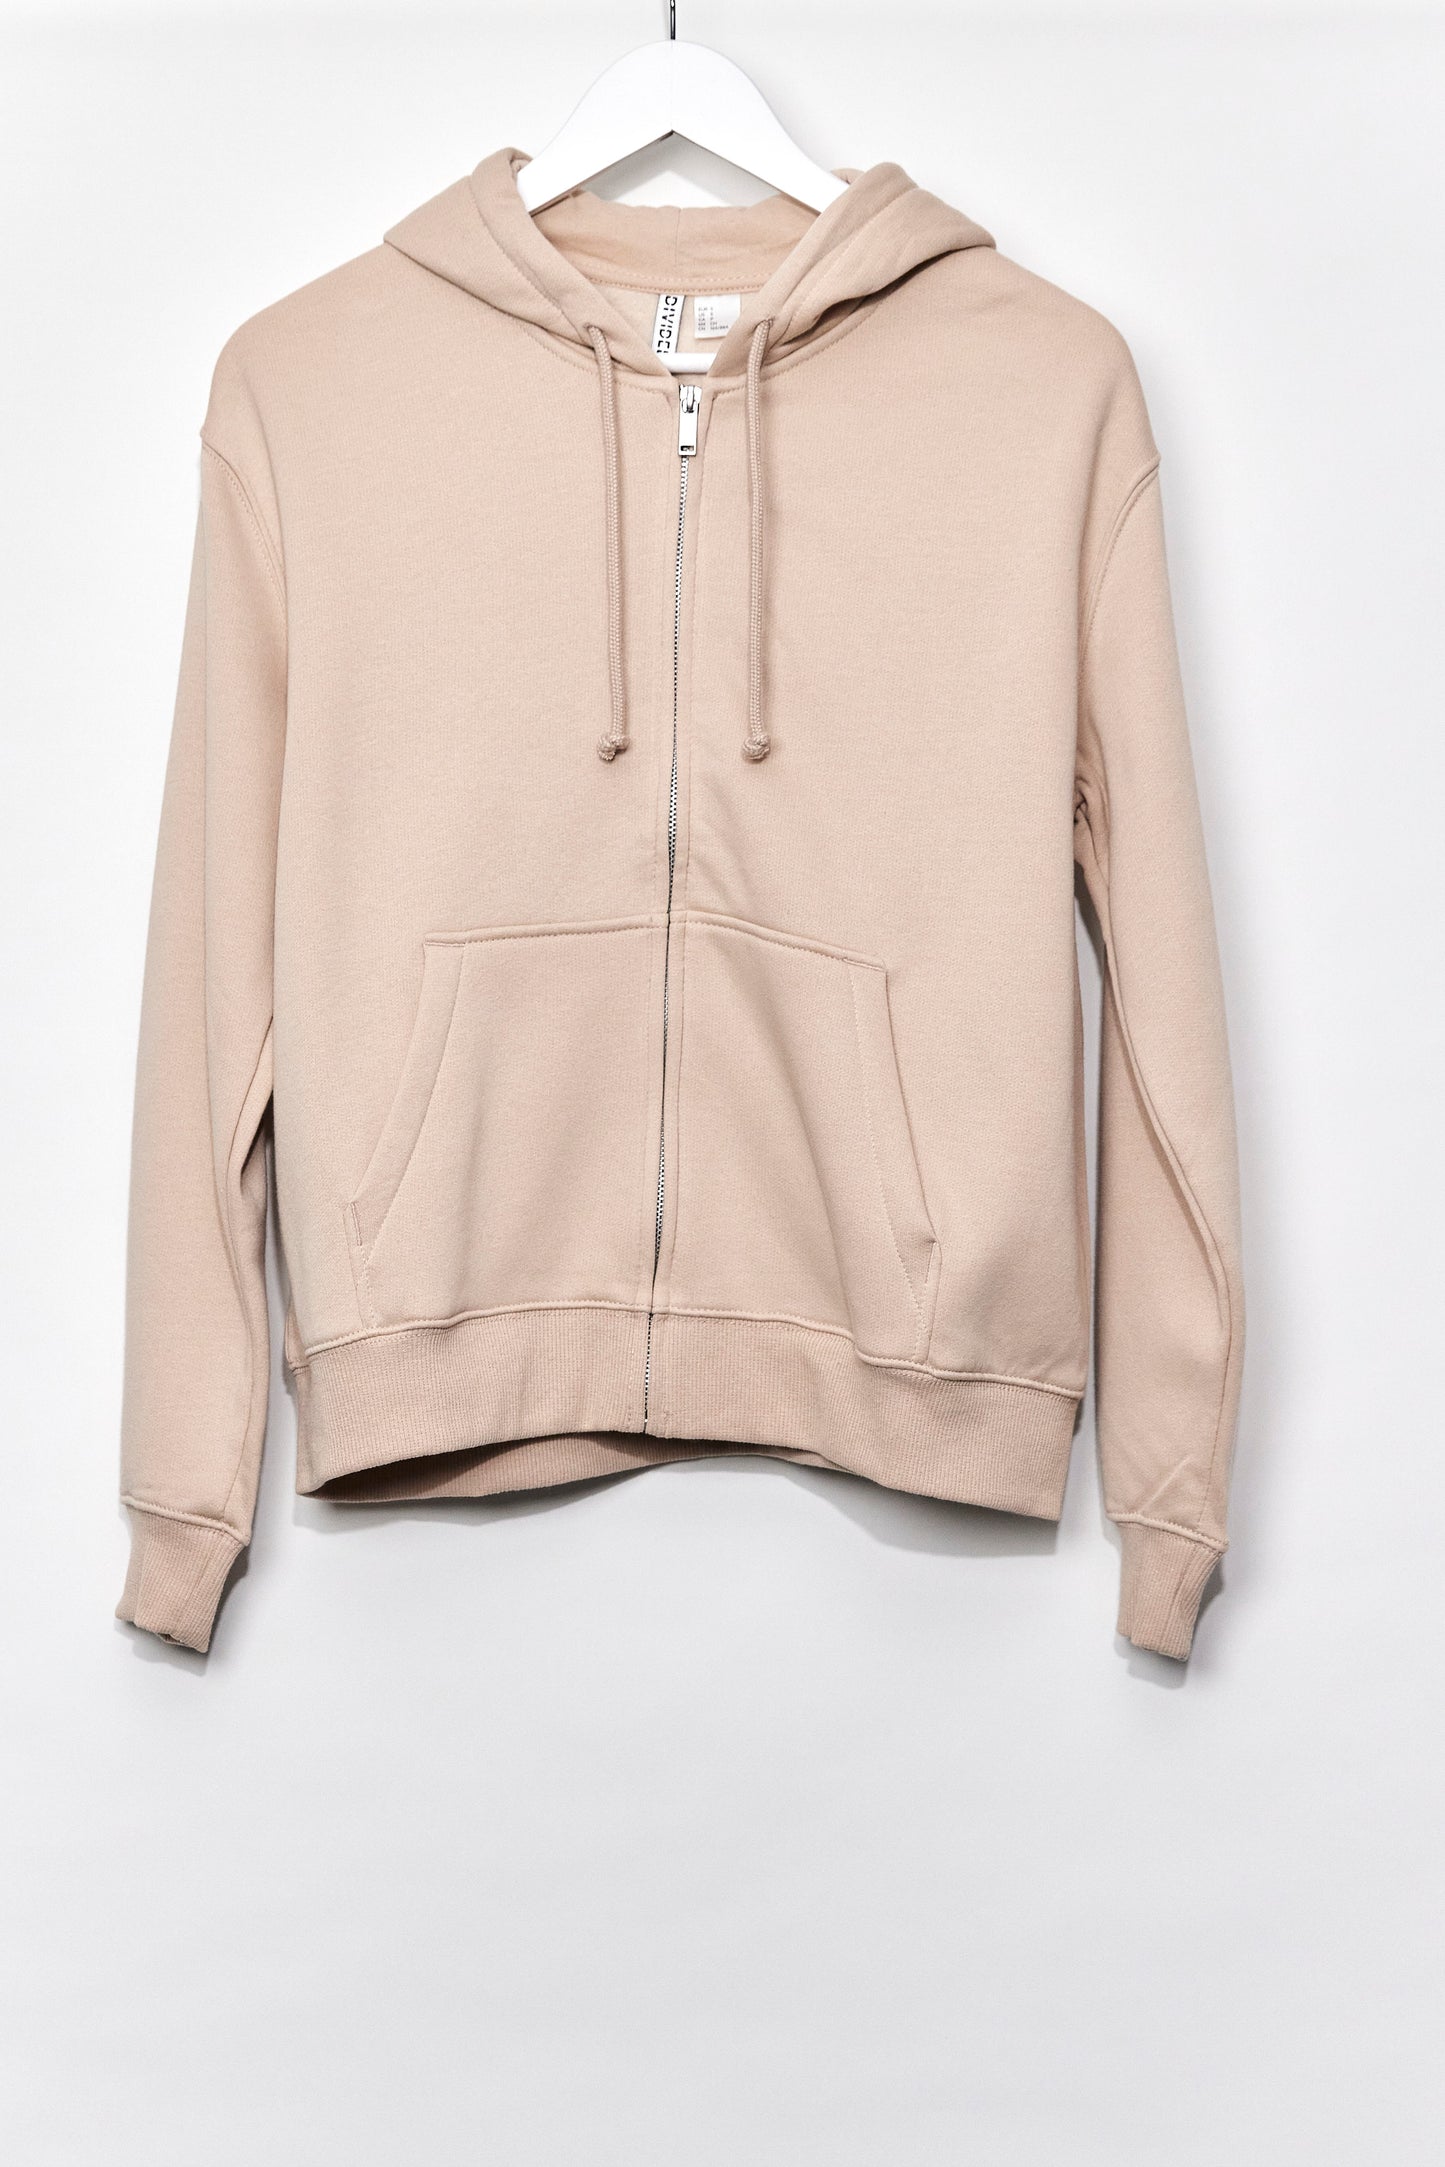 Womens H&M Beige Zip up Hoodie size Small